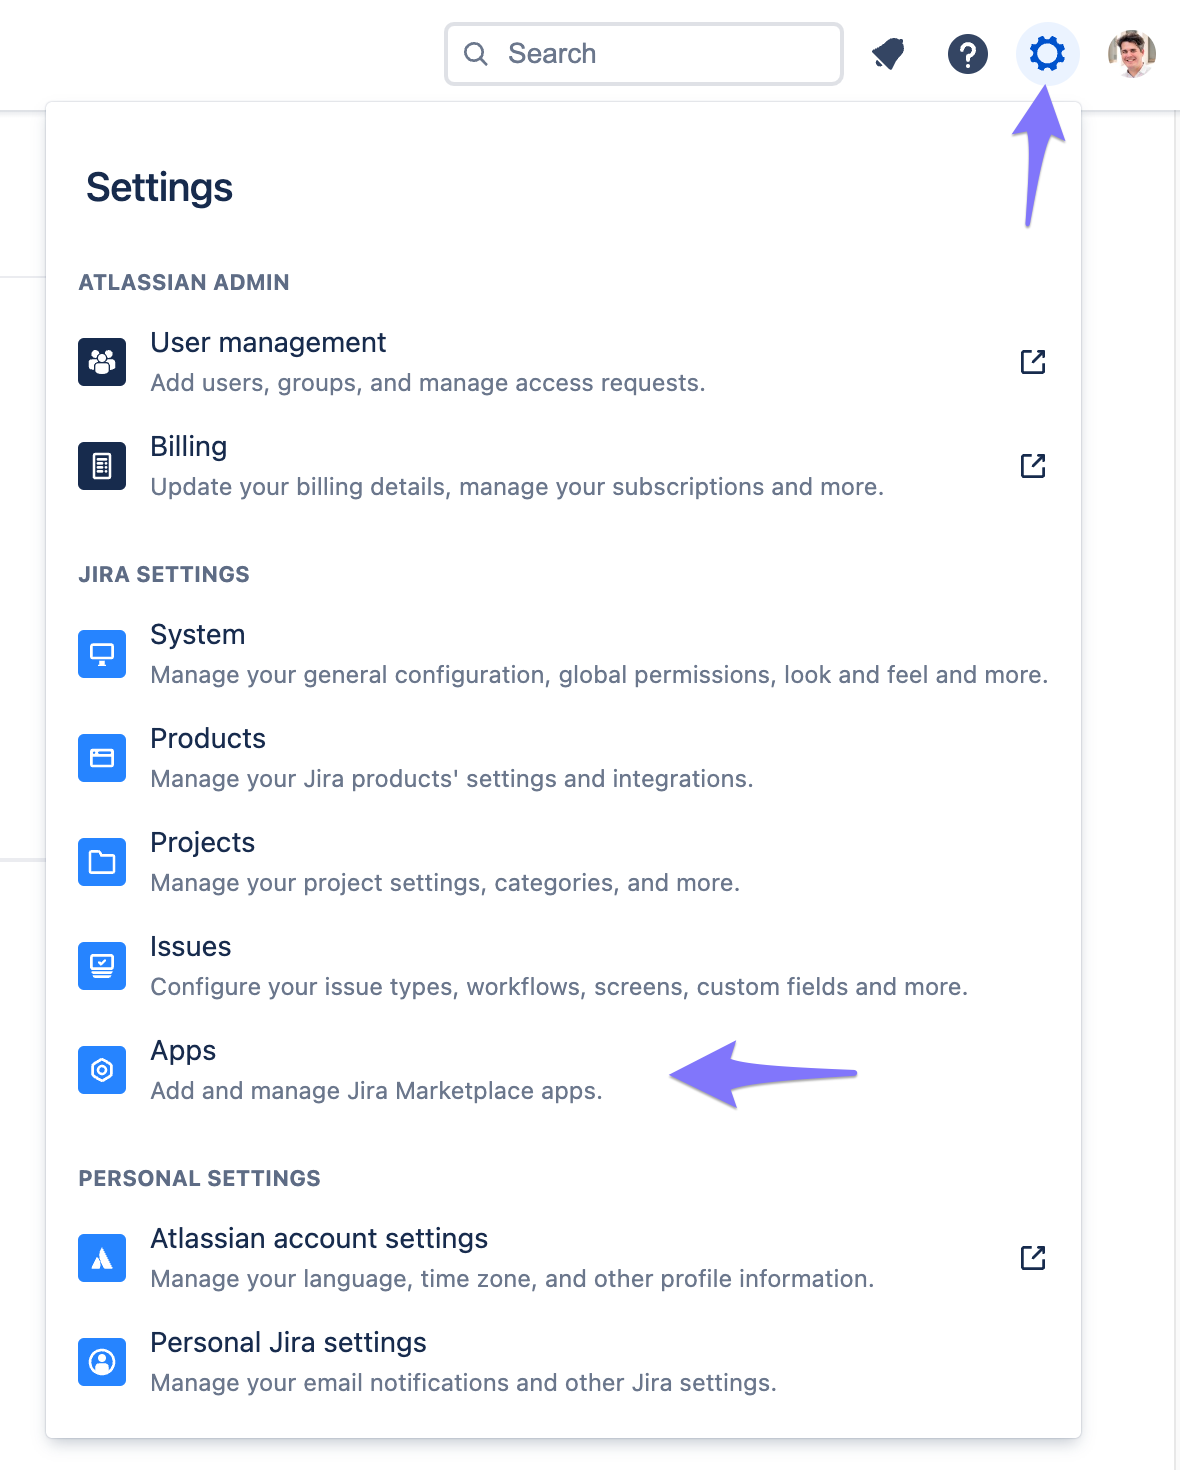 Go to Settings > Apps